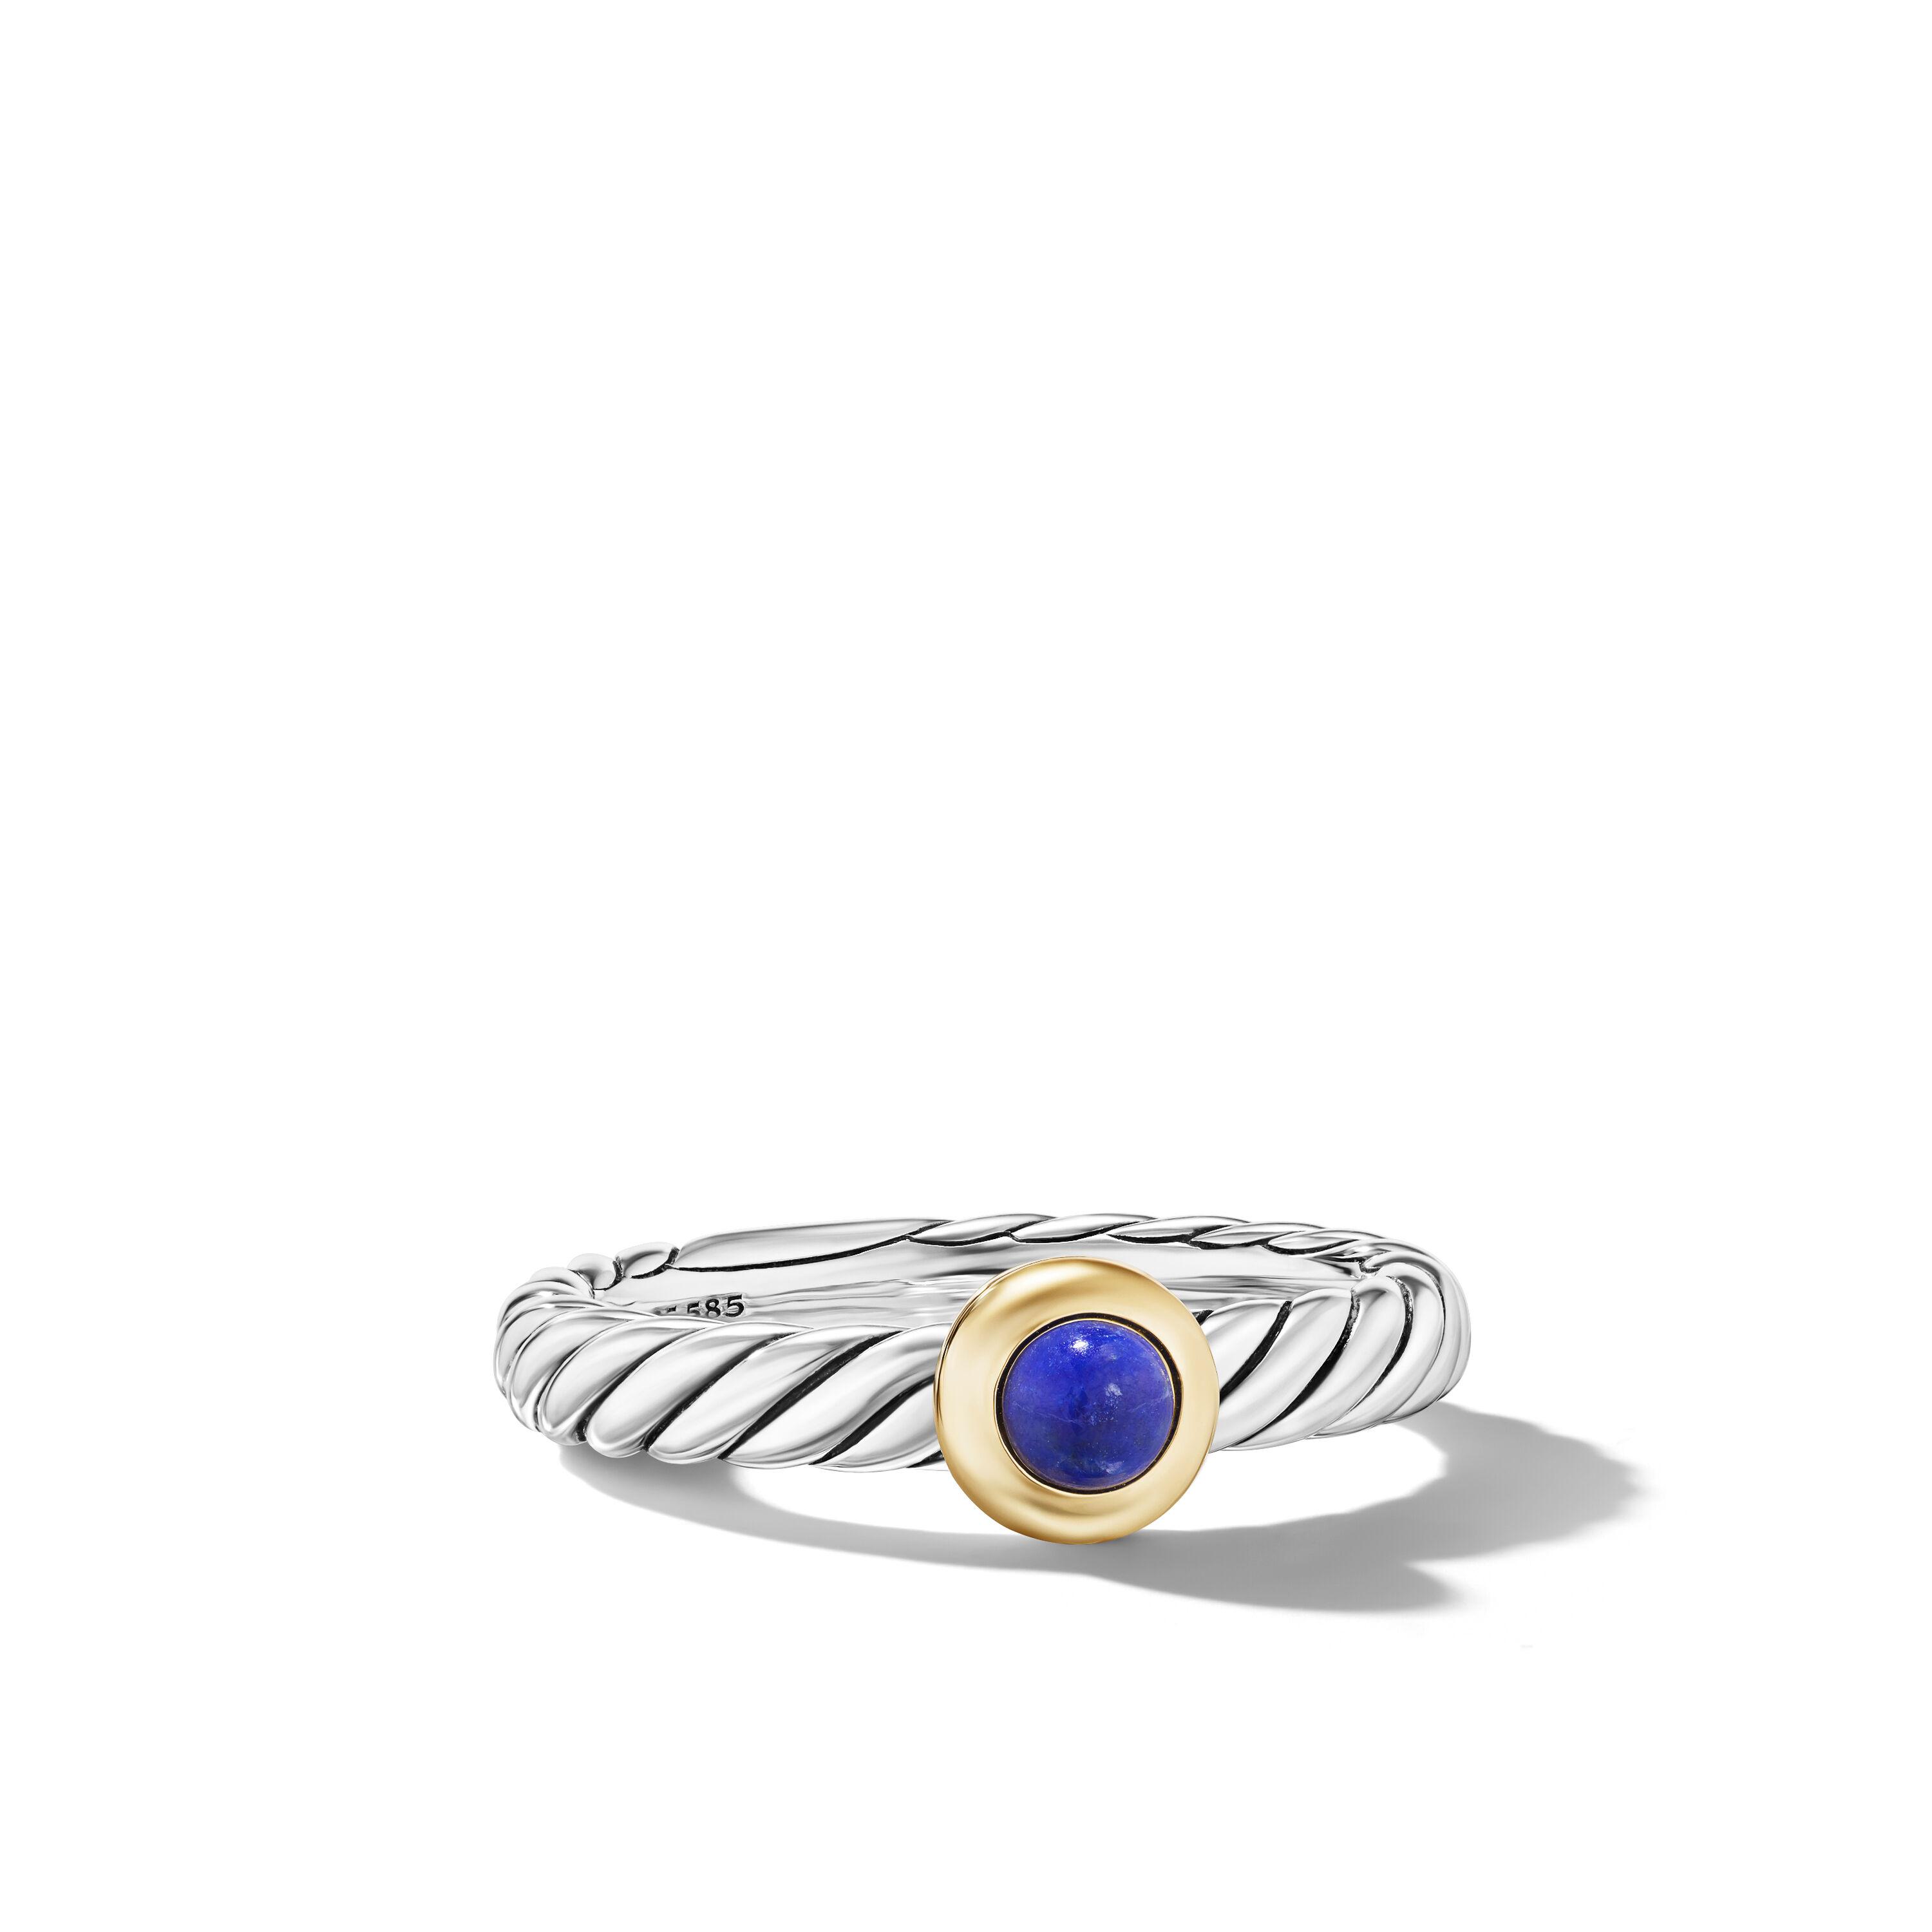 David Yurman Petite Cable Ring in Sterling Silver with 14K Yellow Gold and Lapis, Size 6